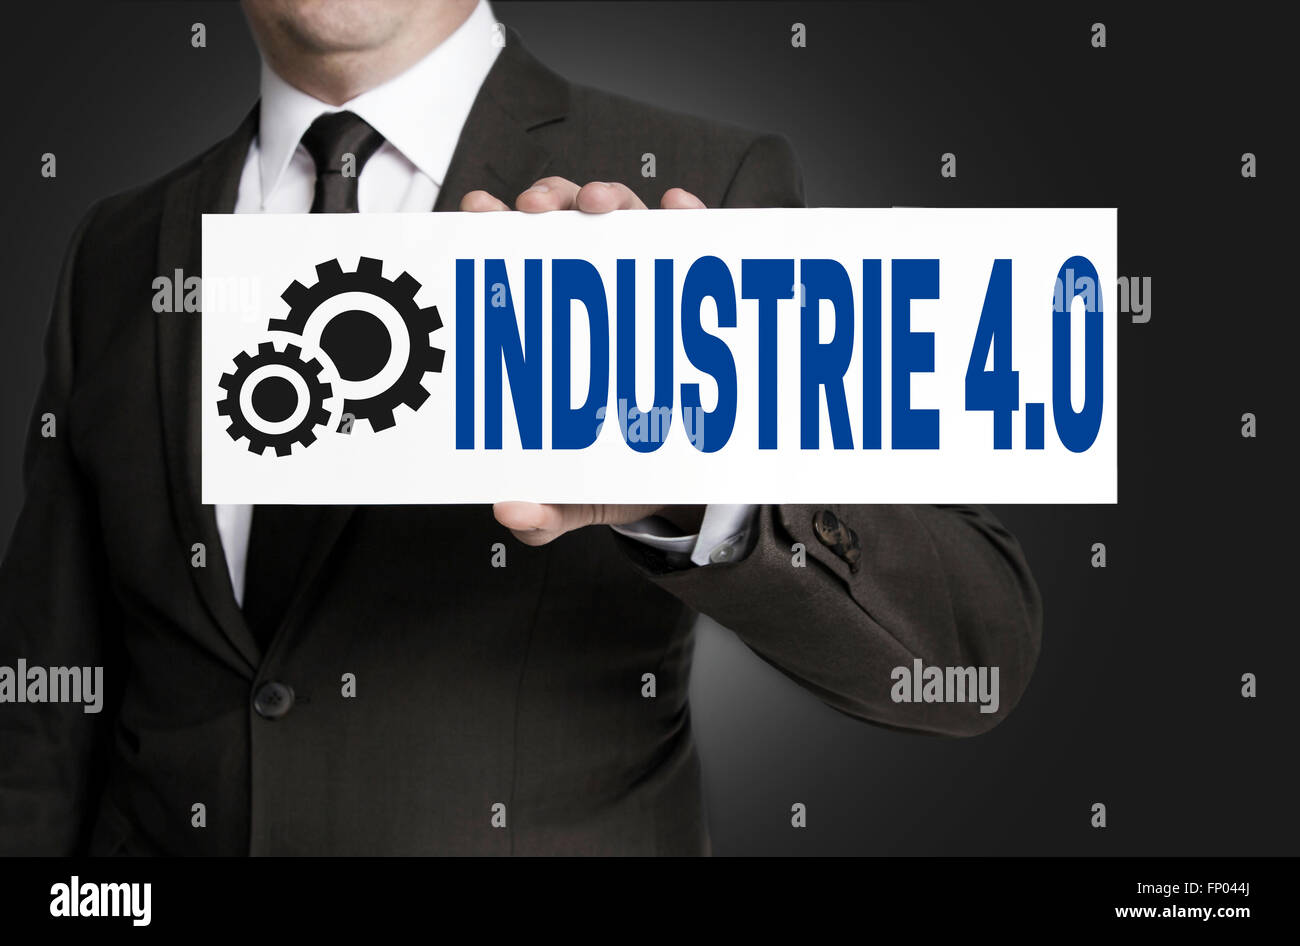 industrie 4.0 in german industry sign is held by businessman. Stock Photo